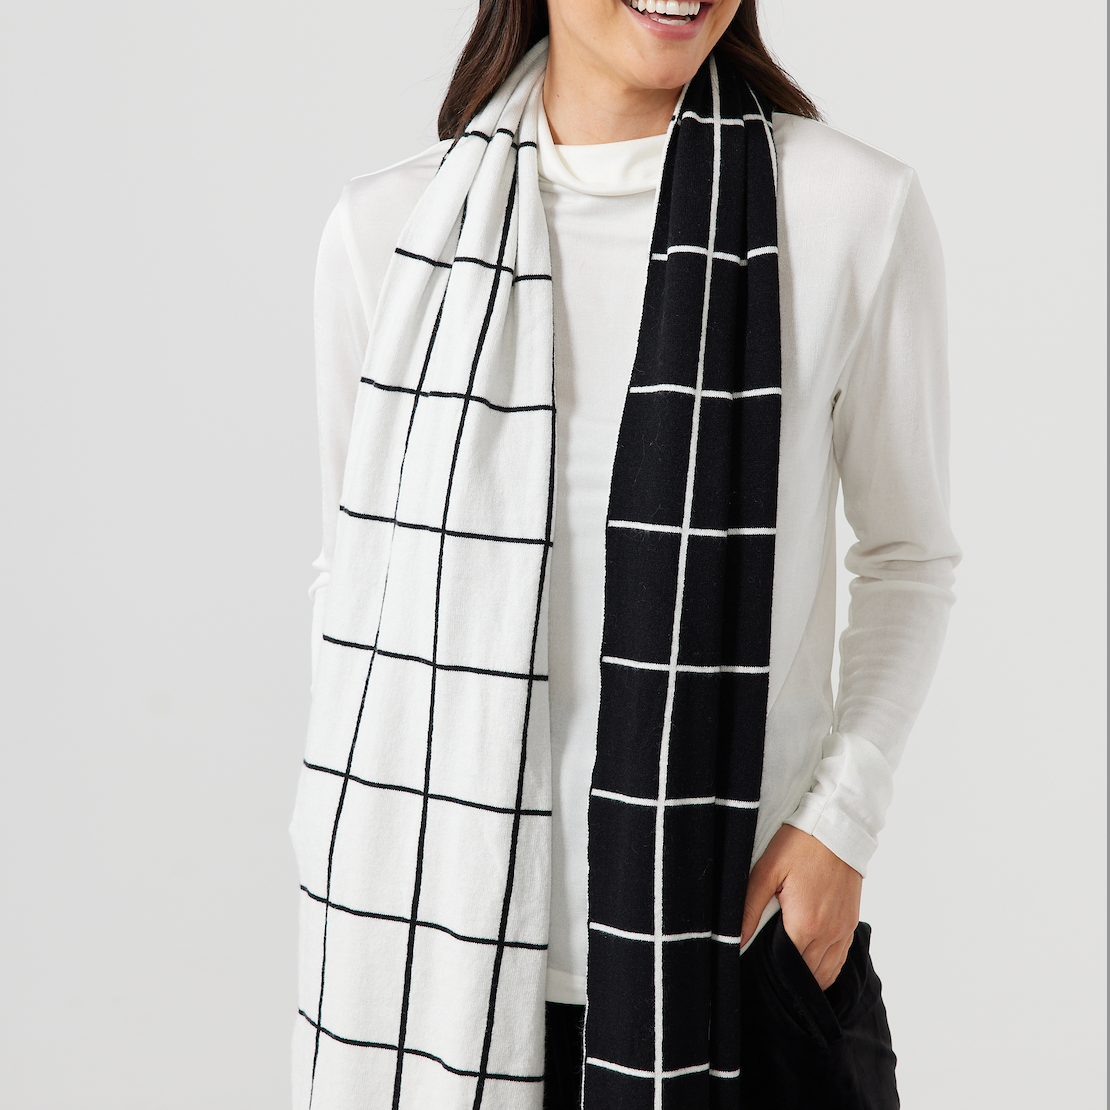 Grid Wrap Scarf - Black and White - Daisy Grace Lifestyle